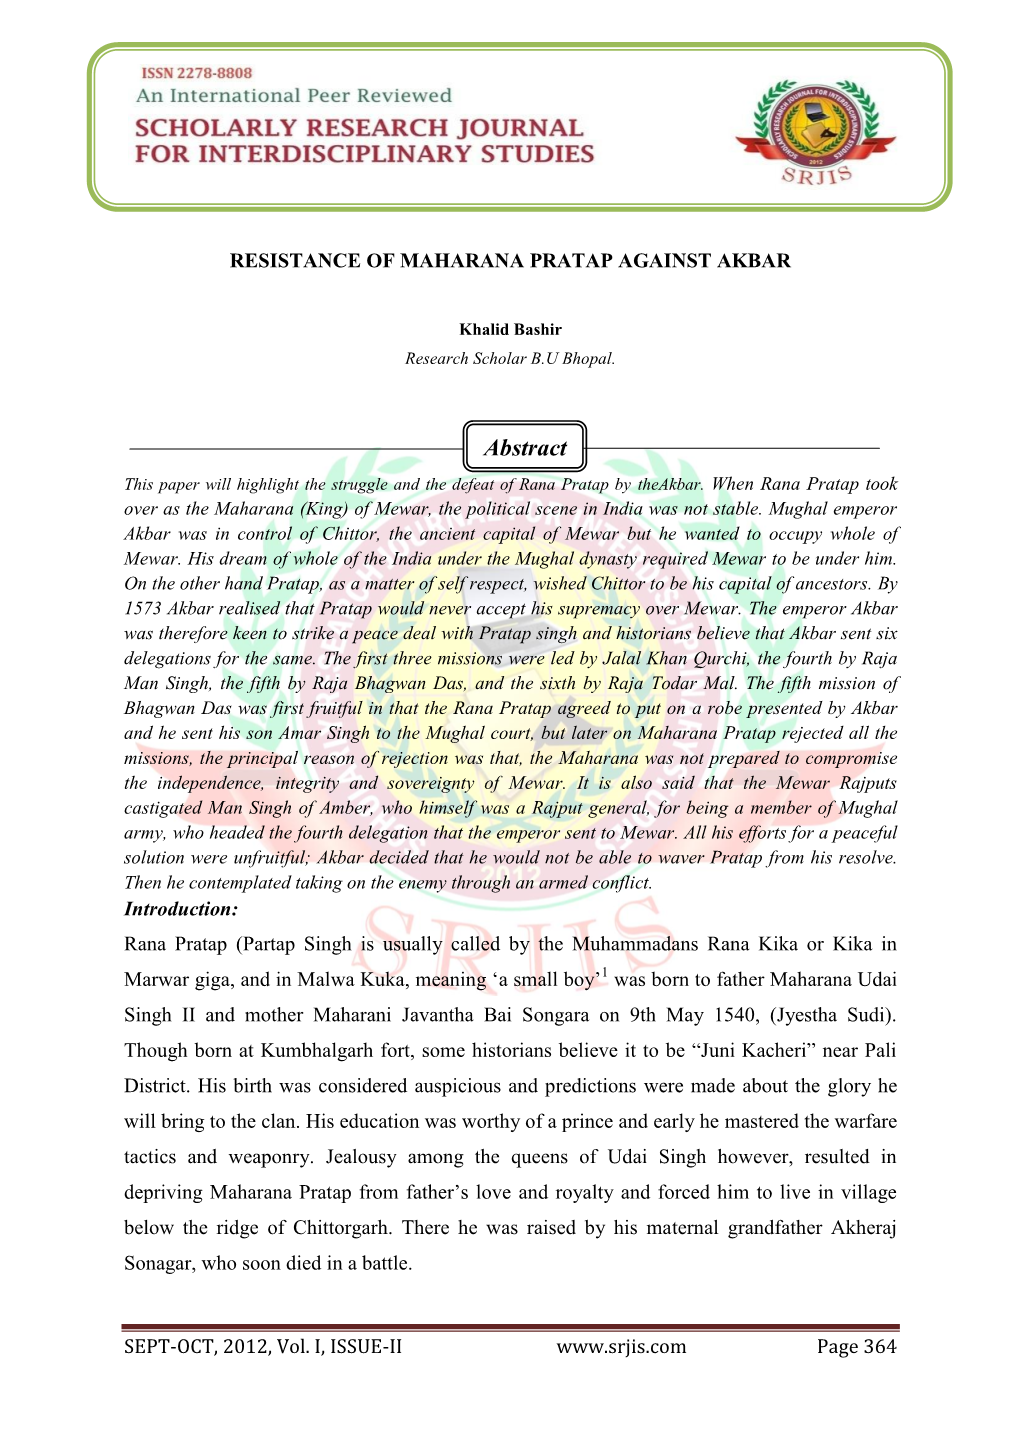 Abstract This Paper Will Highlight the Struggle and the Defeat of Rana Pratap by Theakbar